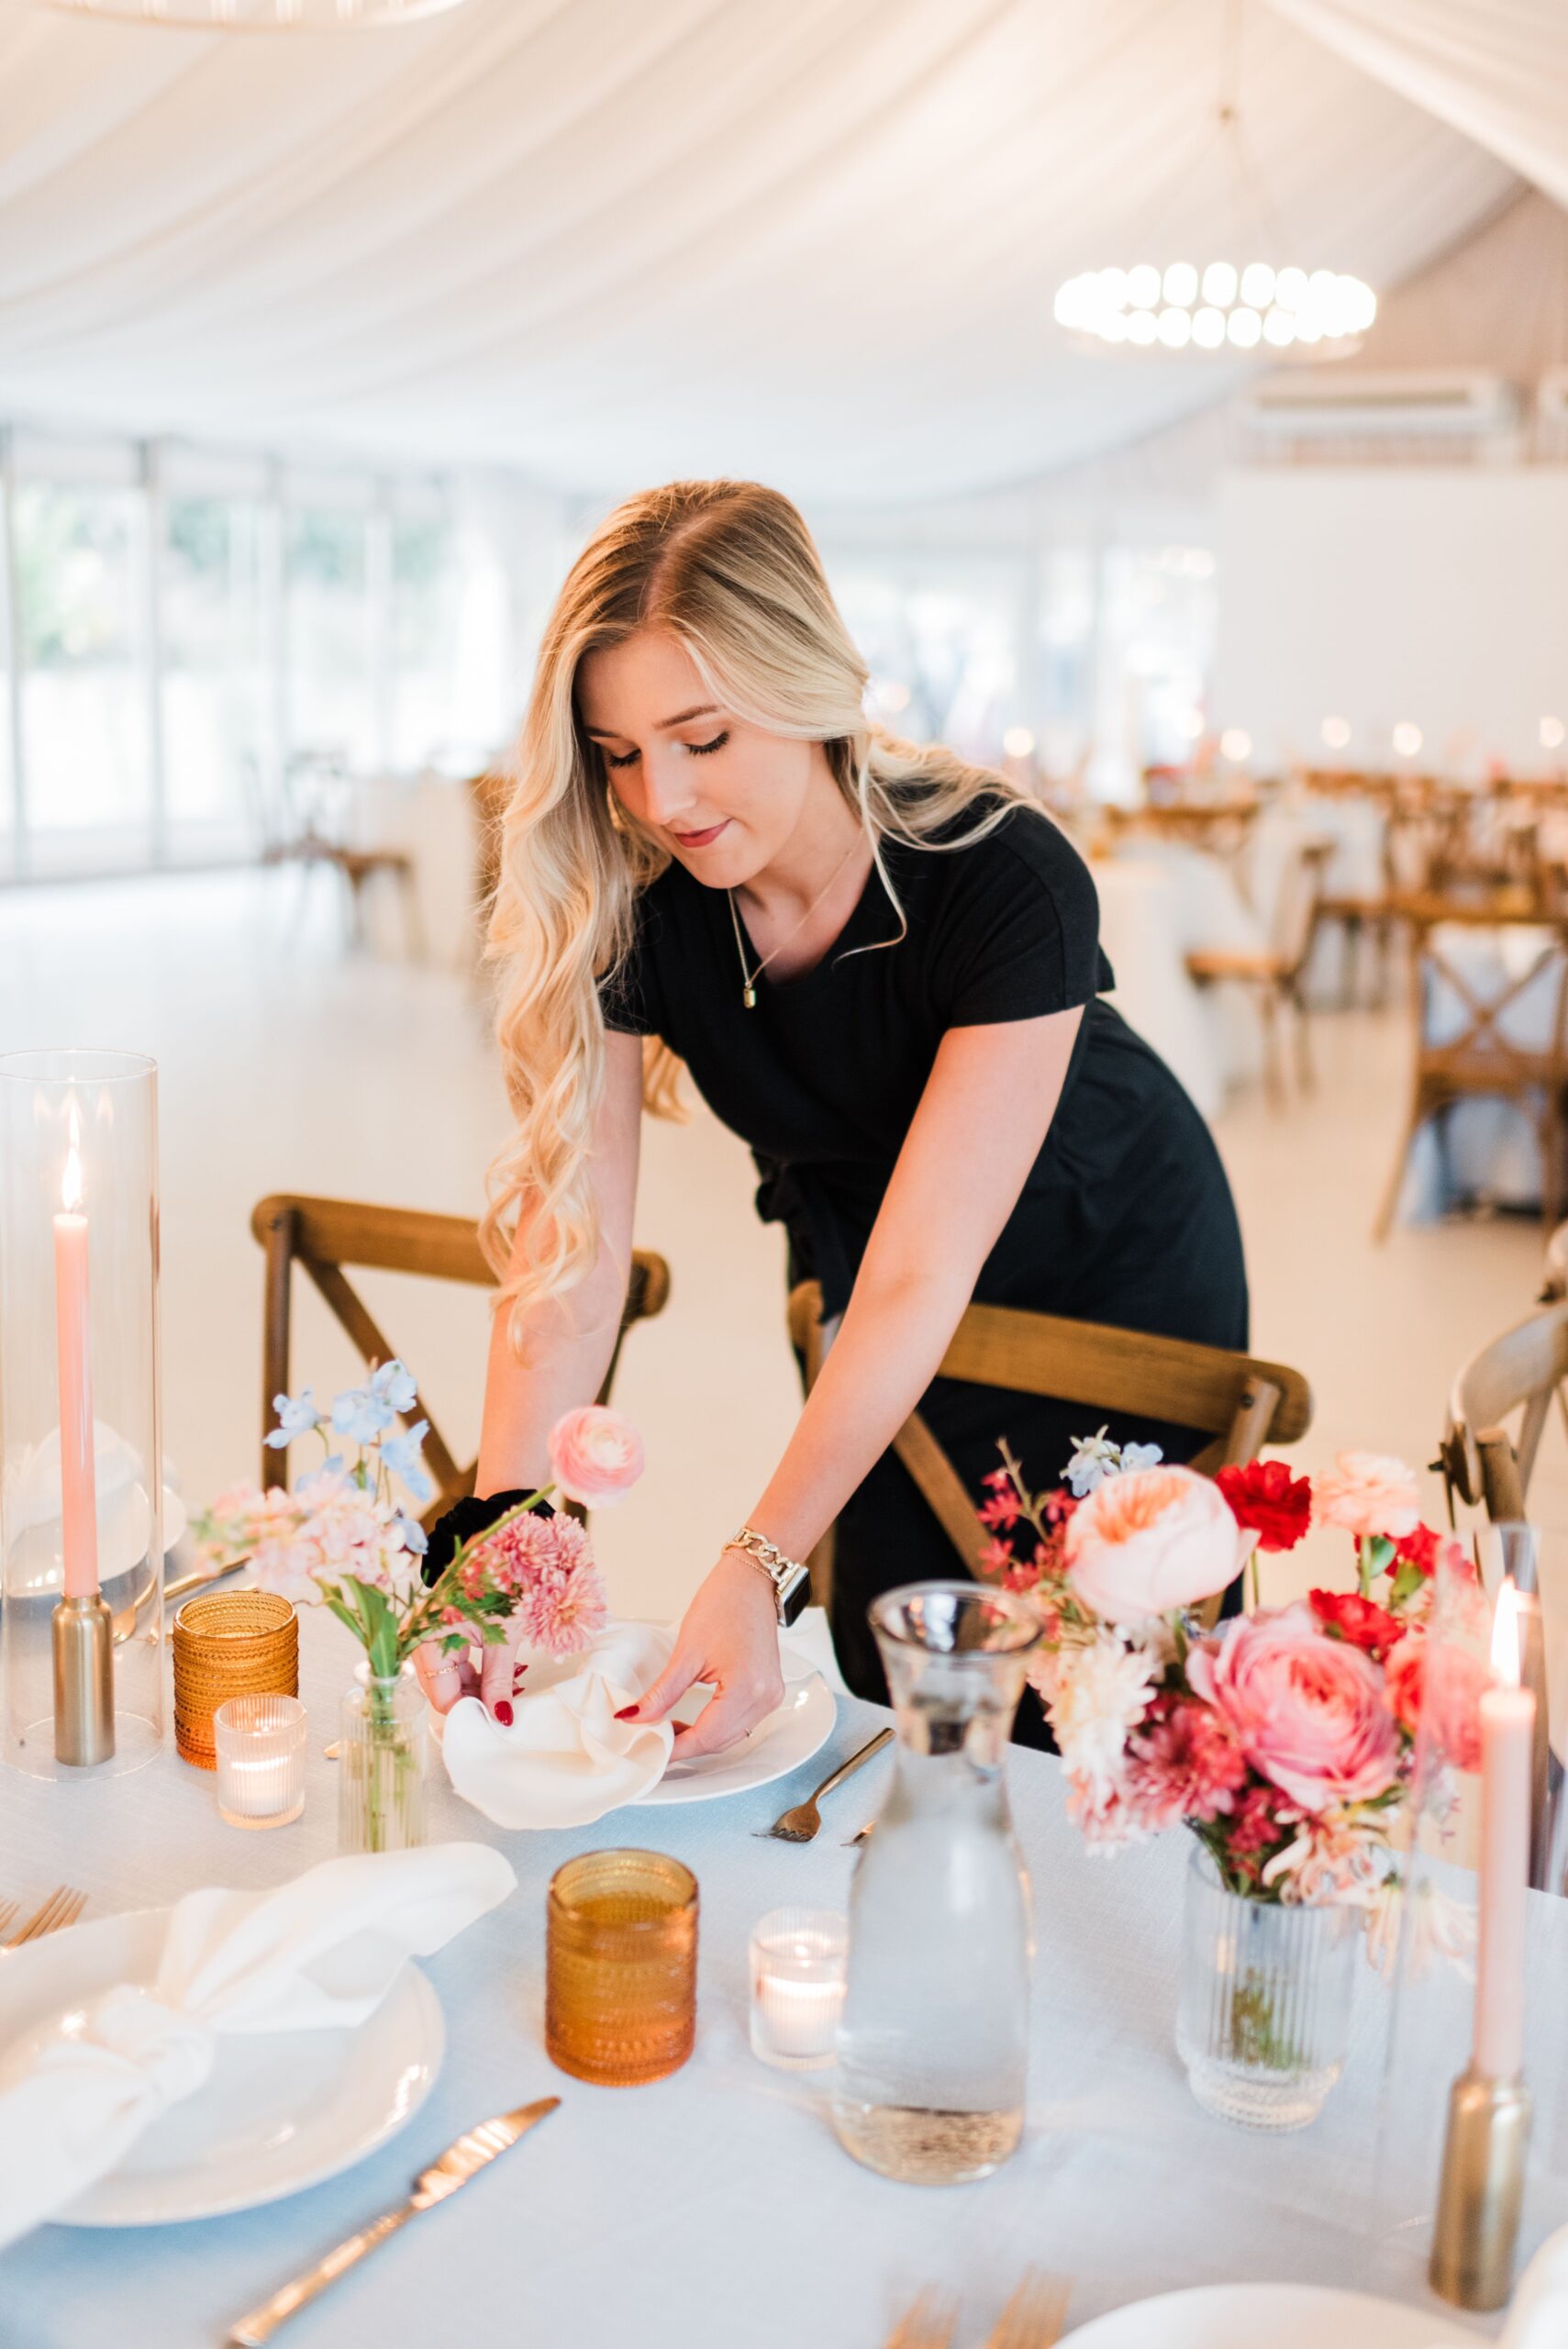 Wedding planner adjusting place setting at a wedding